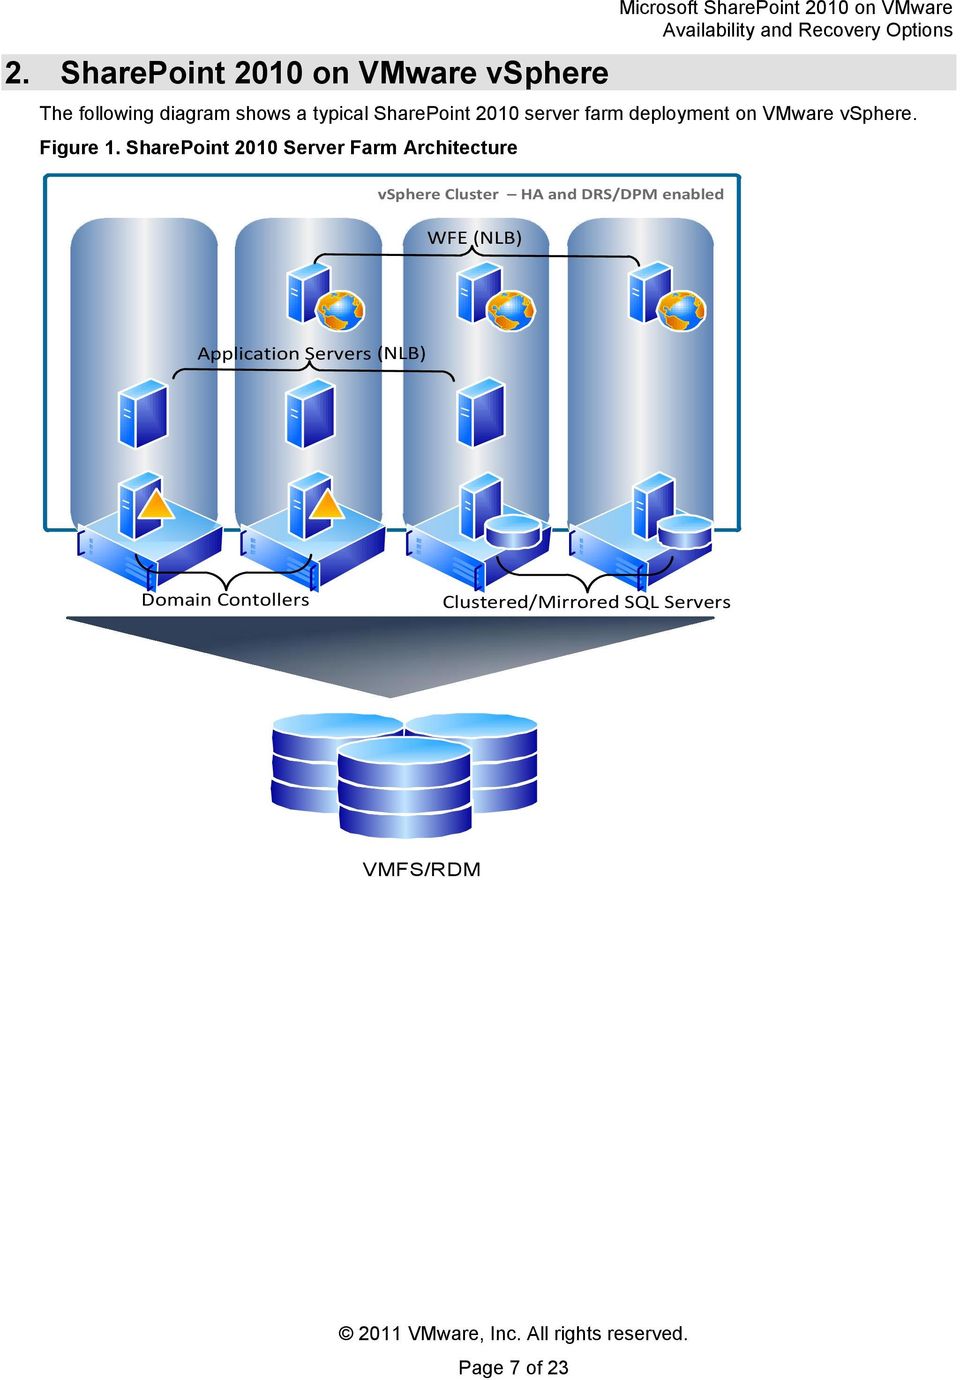 SharePoint 2010 Server Farm Architecture vsphere Cluster HA and DRS/DPM enabled